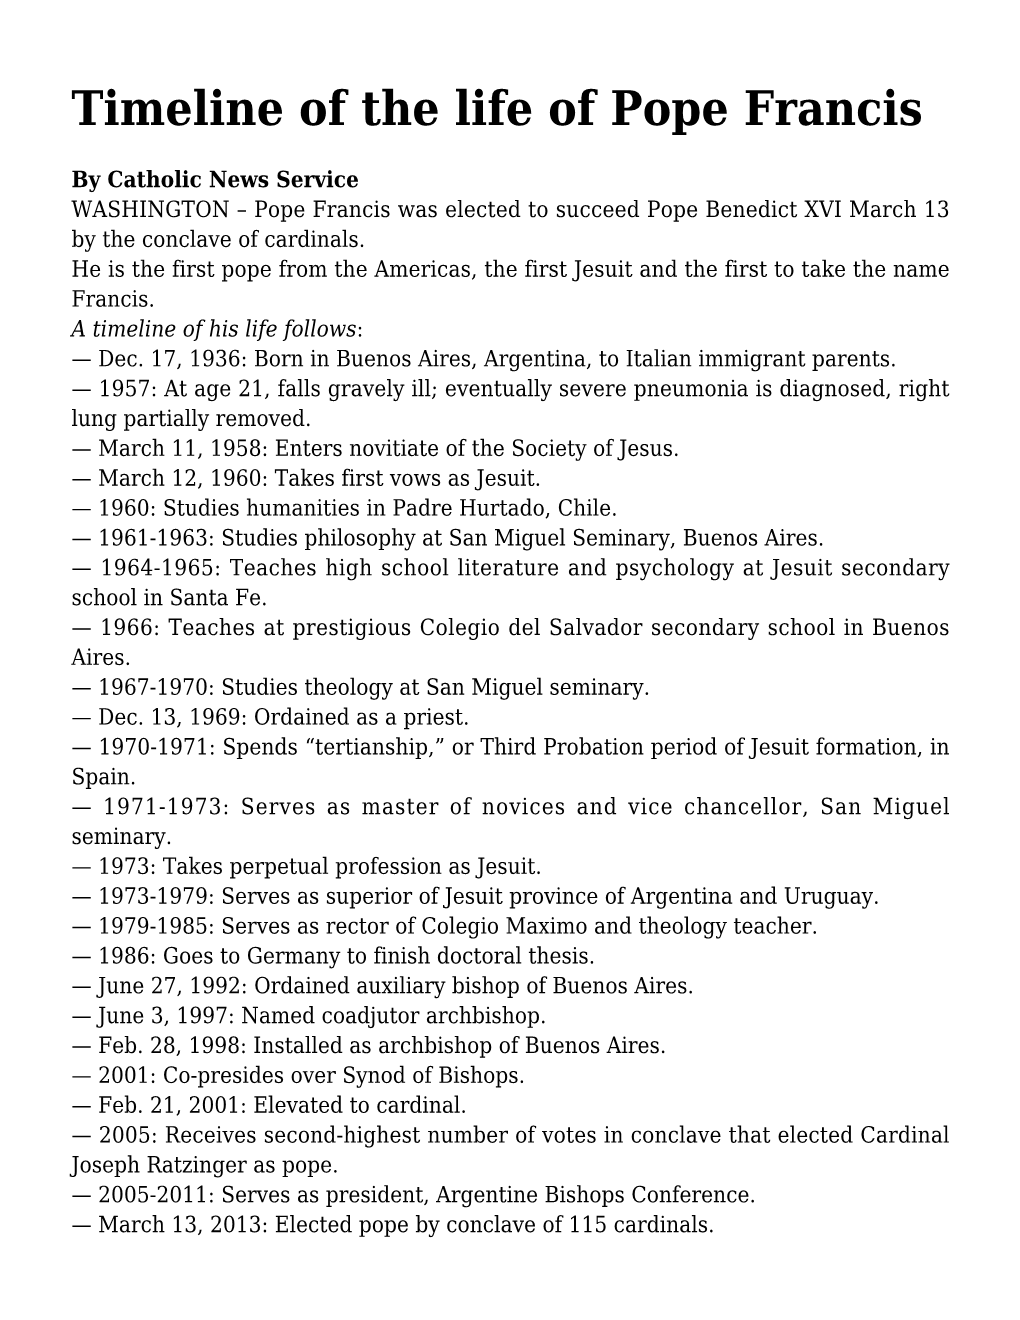 Timeline of the Life of Pope Francis